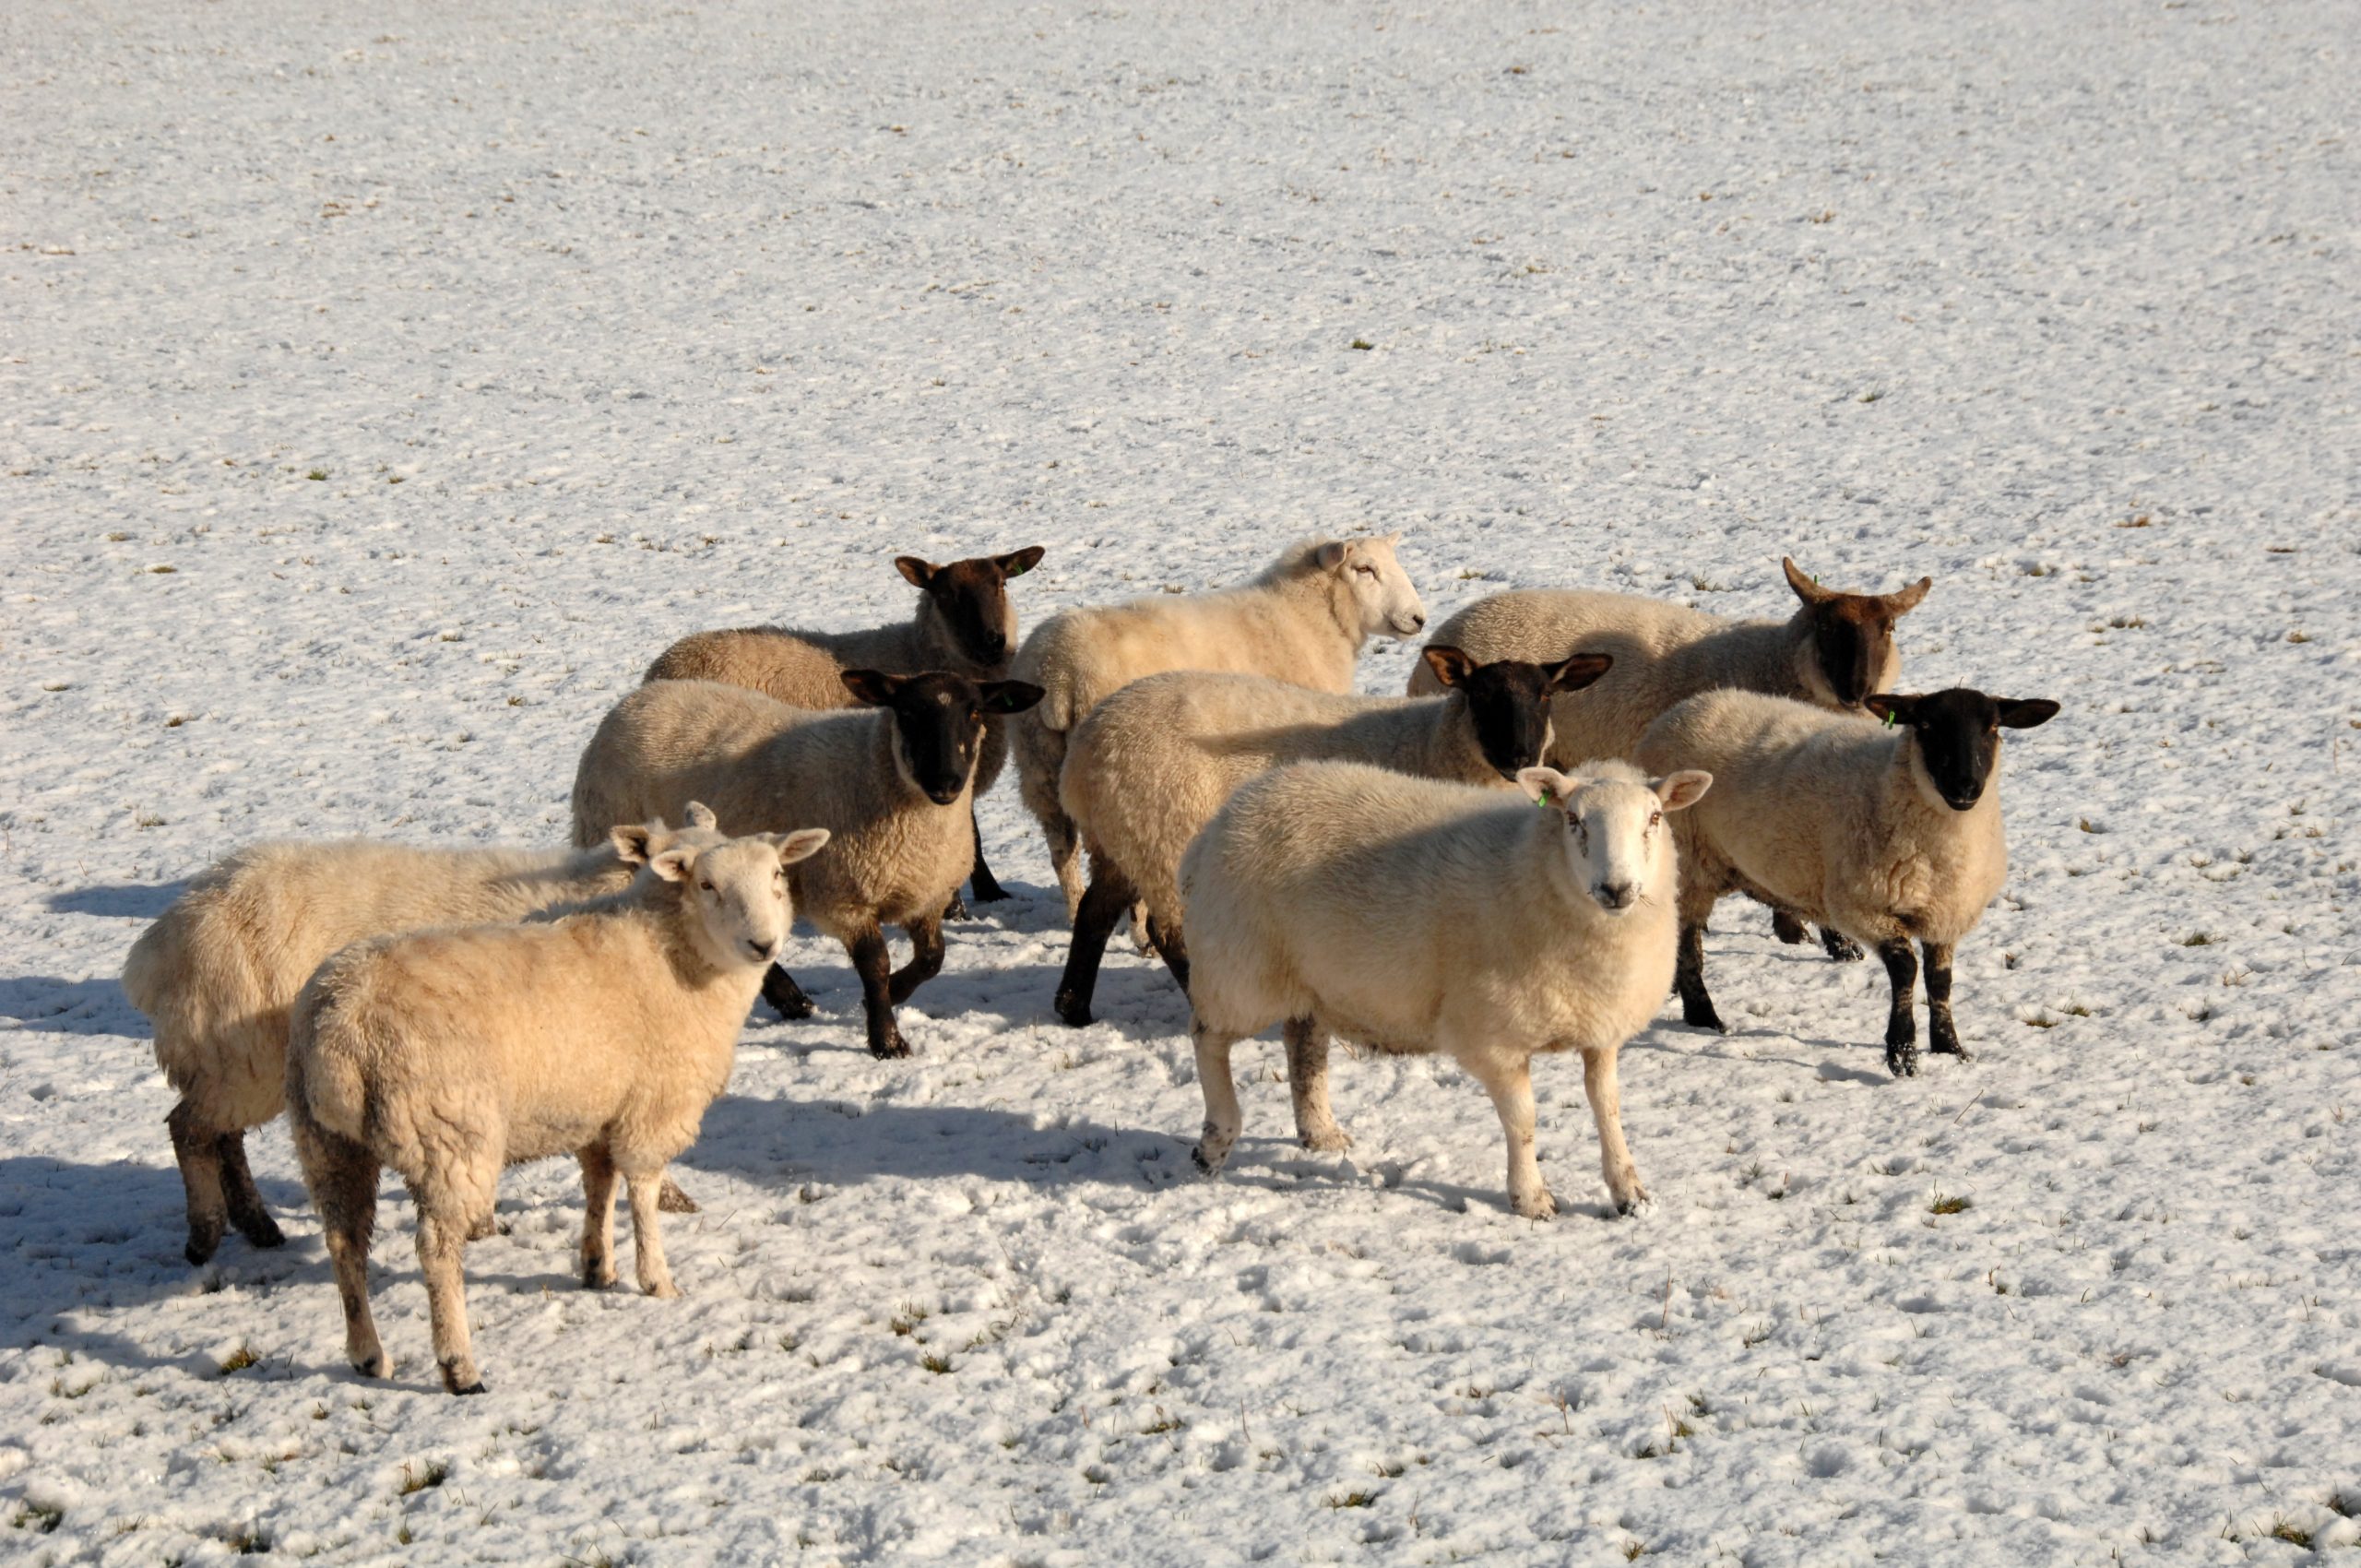 AFBI winter warning on the risk of certain ornamental plants to sheep